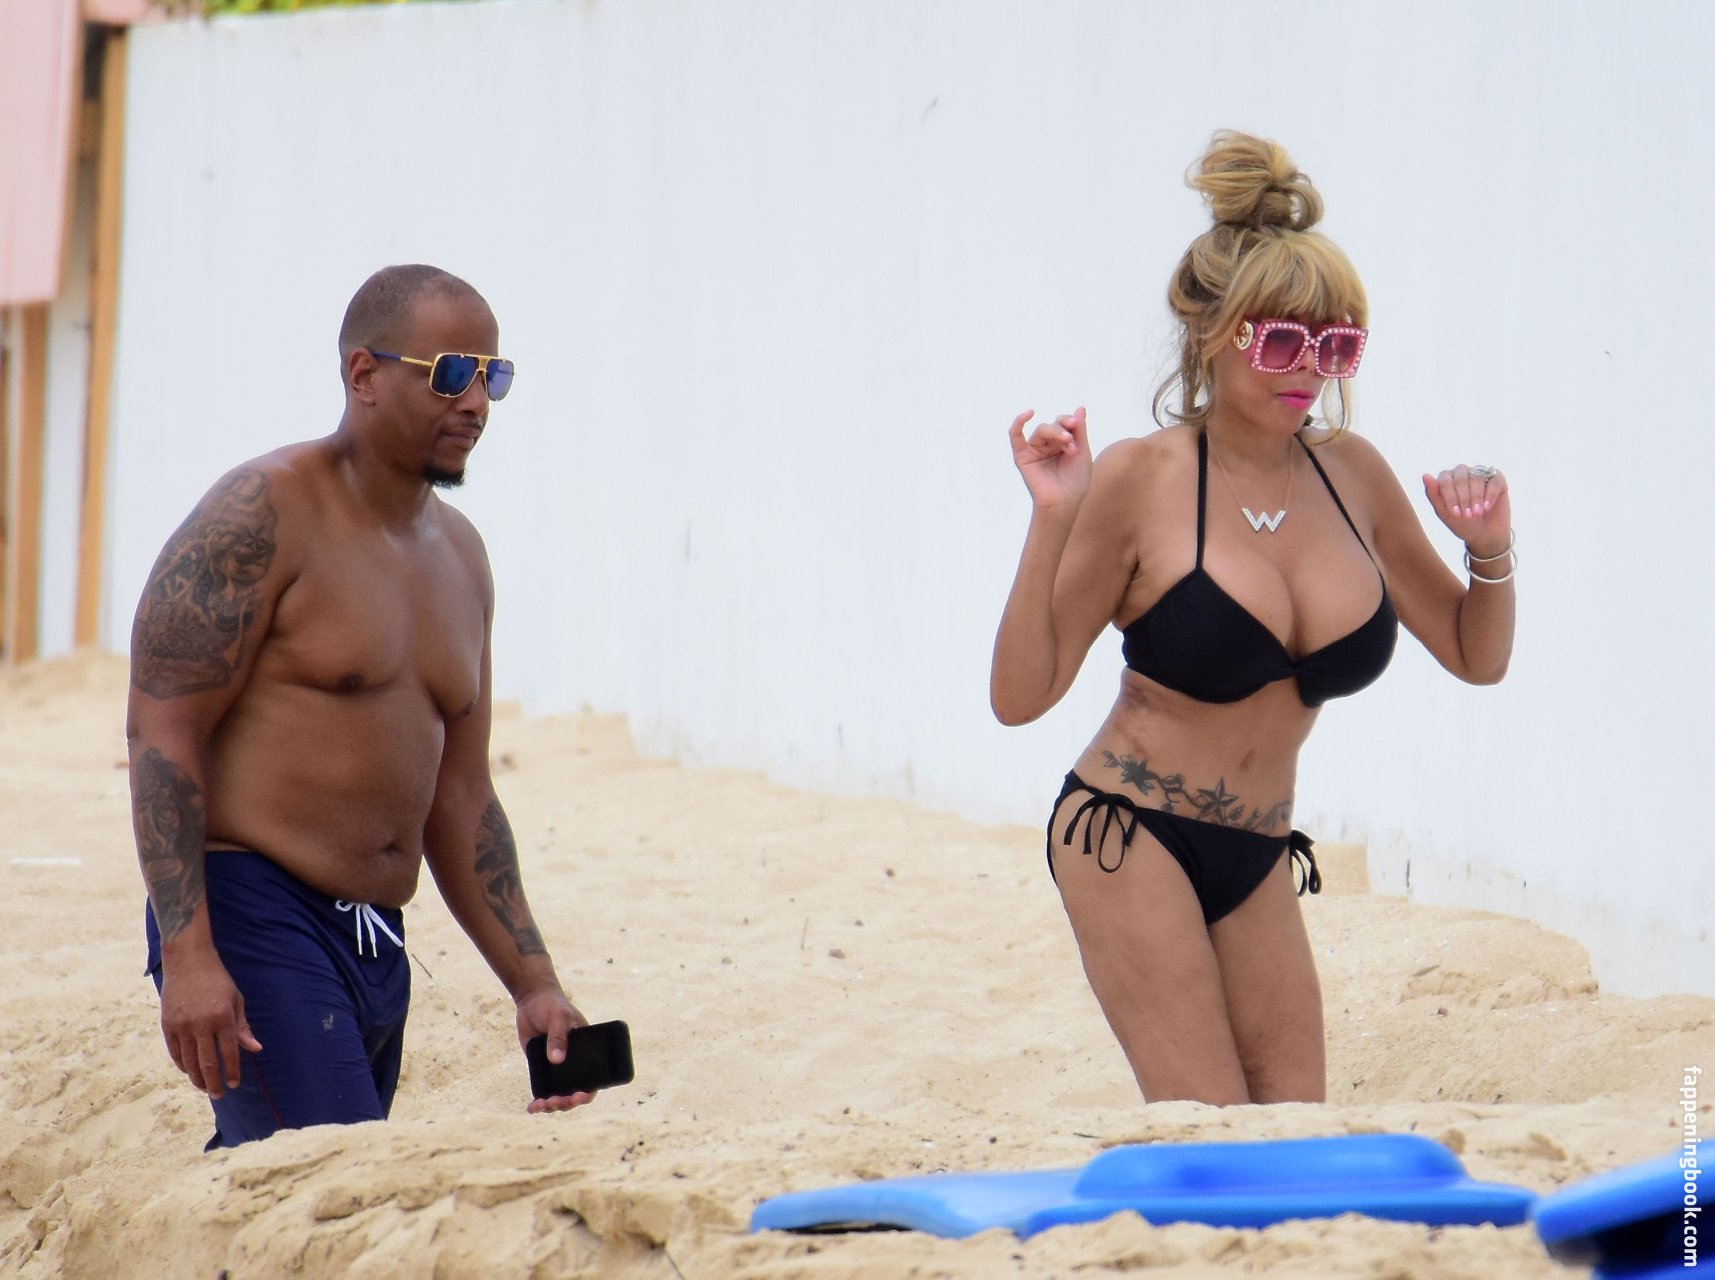 Wendy Williams Nude, The Fappening - Photo #886227 - FappeningBook.